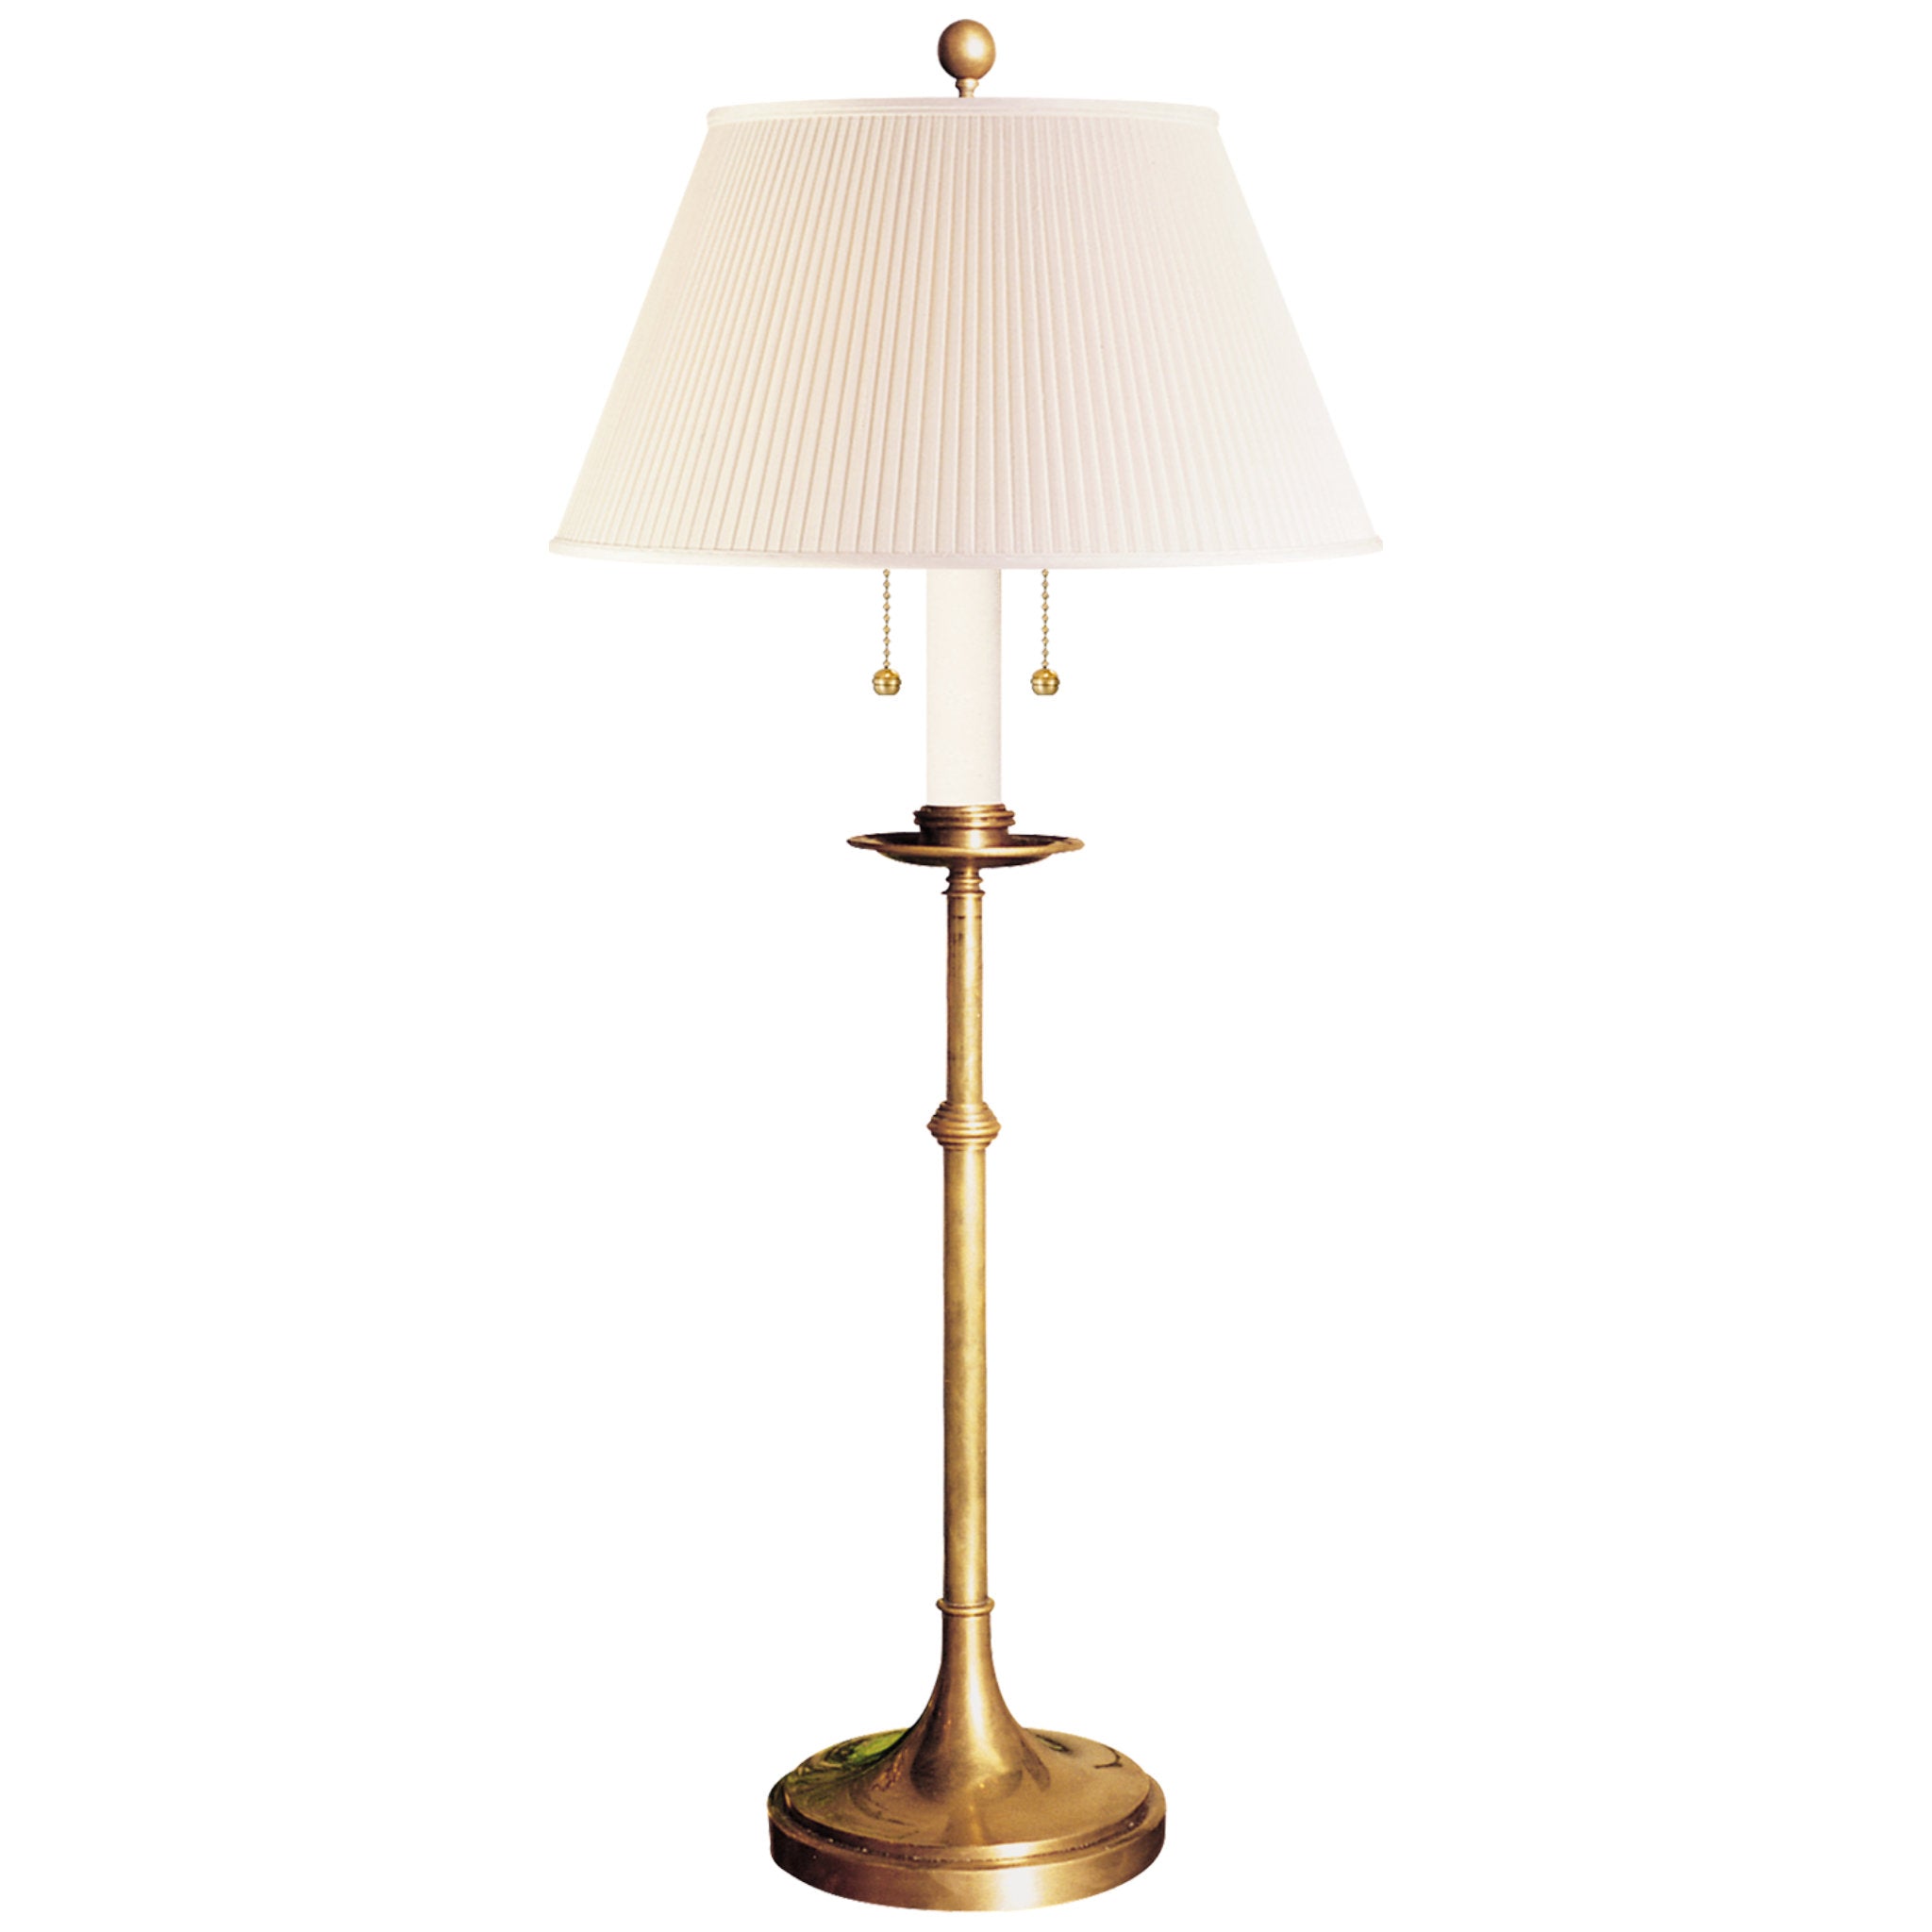 Chapman & Myers Dorchester Club Table Lamp in Antique-Burnished Brass with Silk Shade